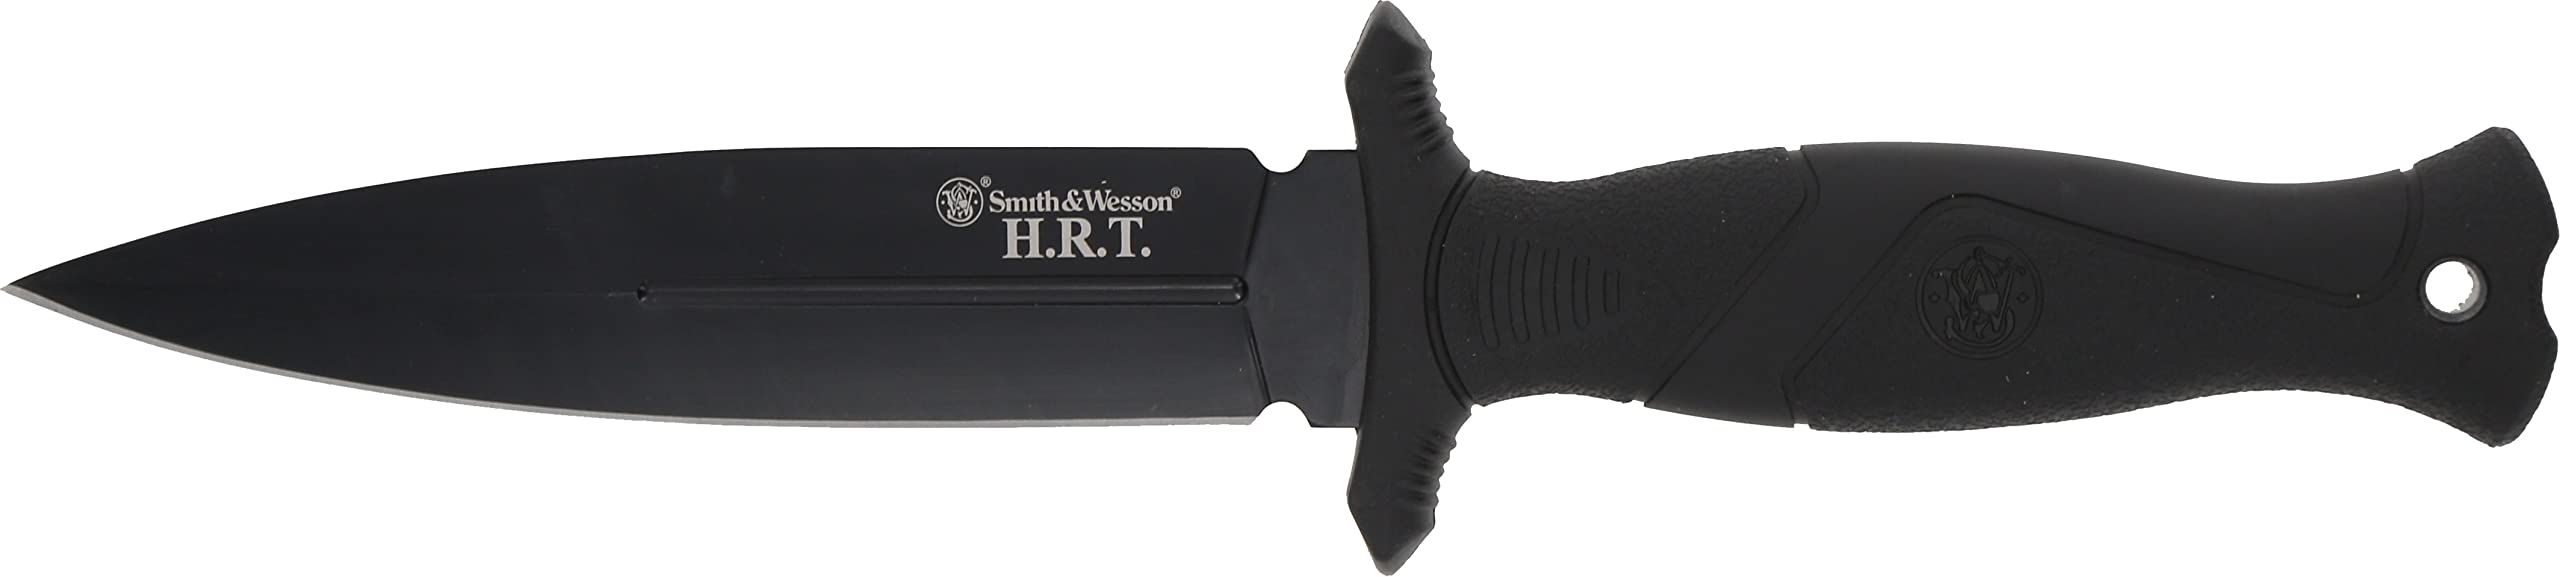 0 Smith & Wesson Boot Knife